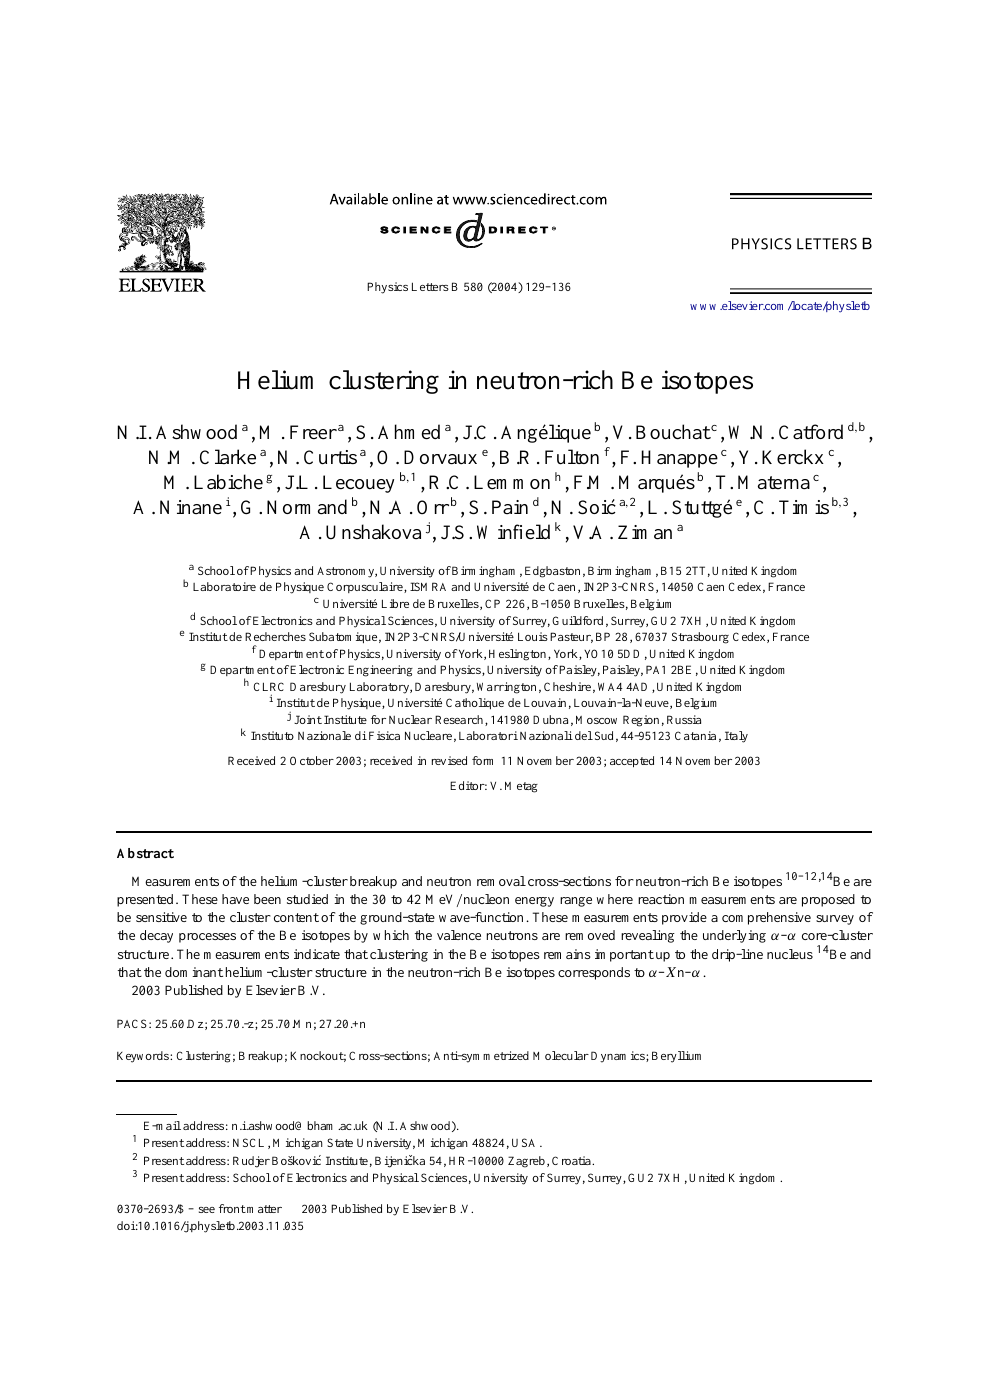 Helium Clustering In Neutron Rich Be Isotopes Topic Of Research Paper In Physical Sciences Download Scholarly Article Pdf And Read For Free On Cyberleninka Open Science Hub